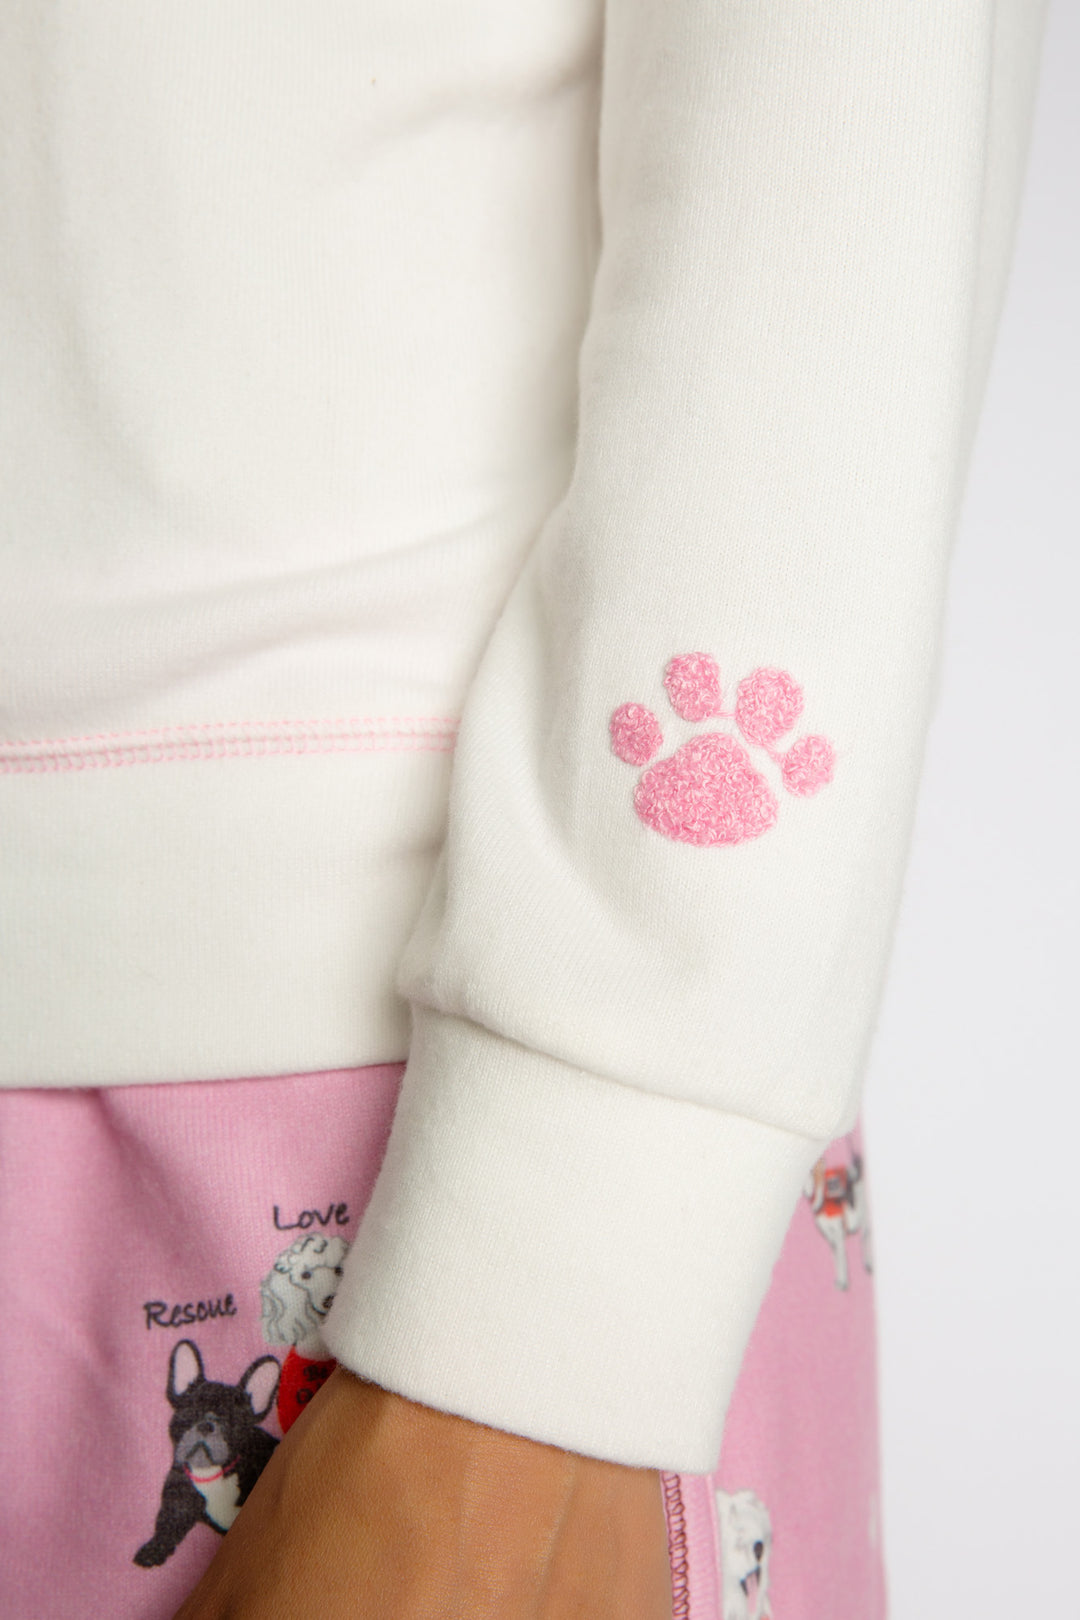 Ivory pullover top has a graphic print "Rescues are my favorite breed" (7325668409444)